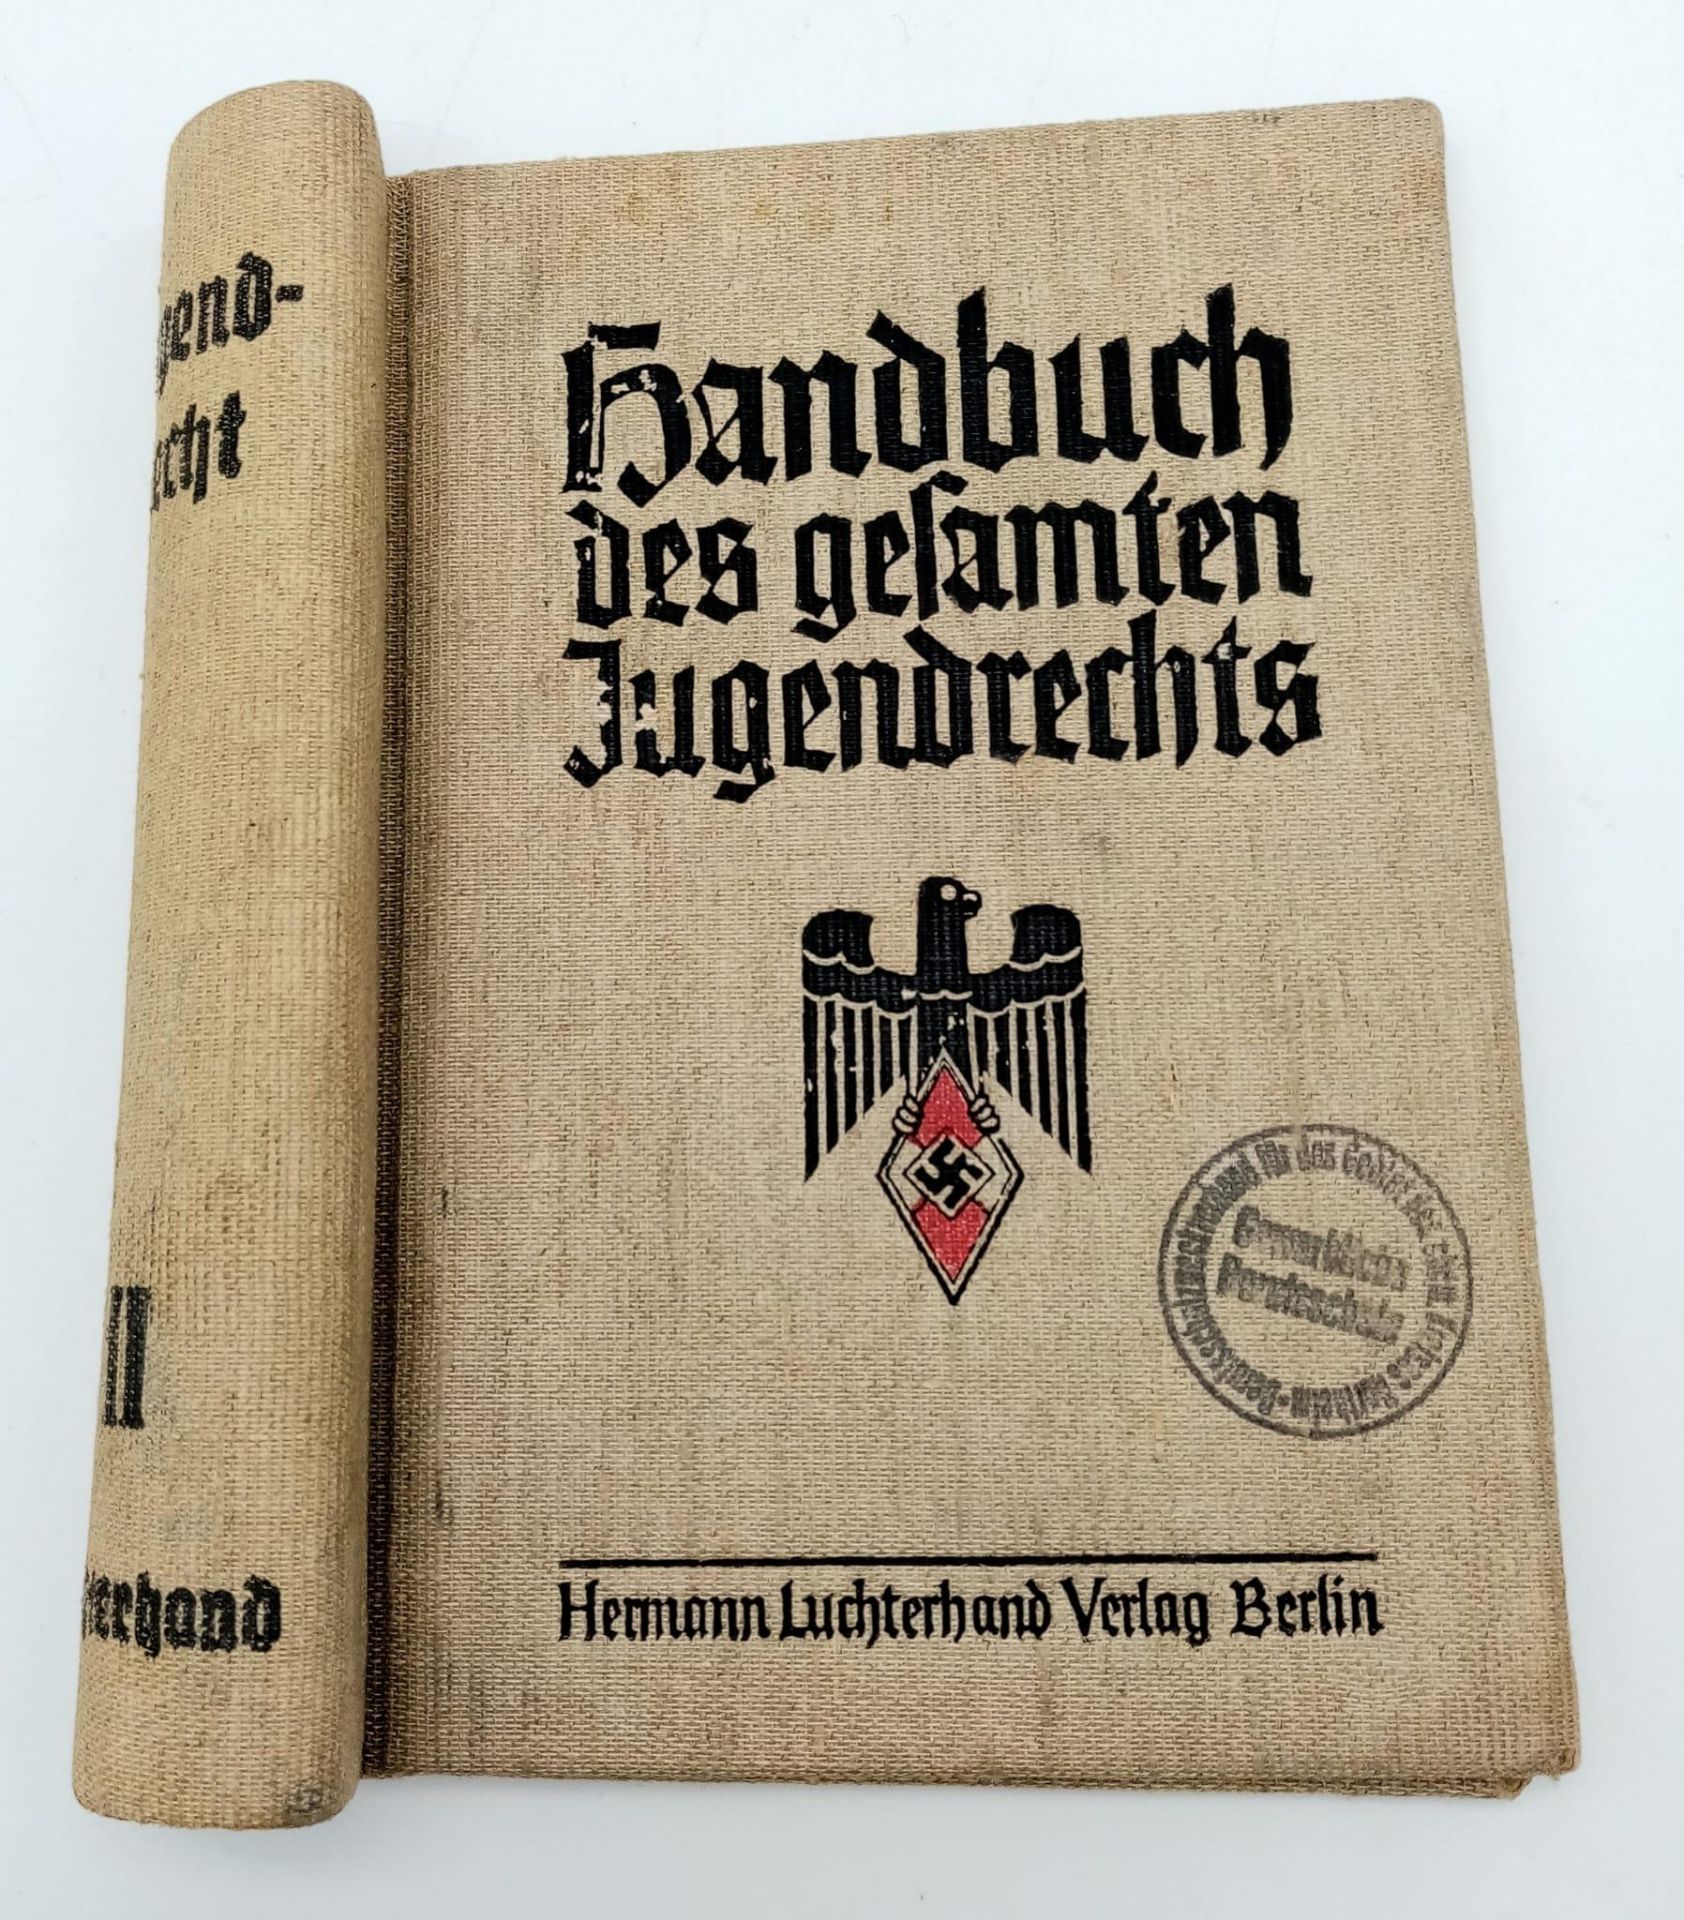 3rd Reich Expanding Book Cover for the “Handbook of the Entire Juvenile Law for the Hitler Youth”